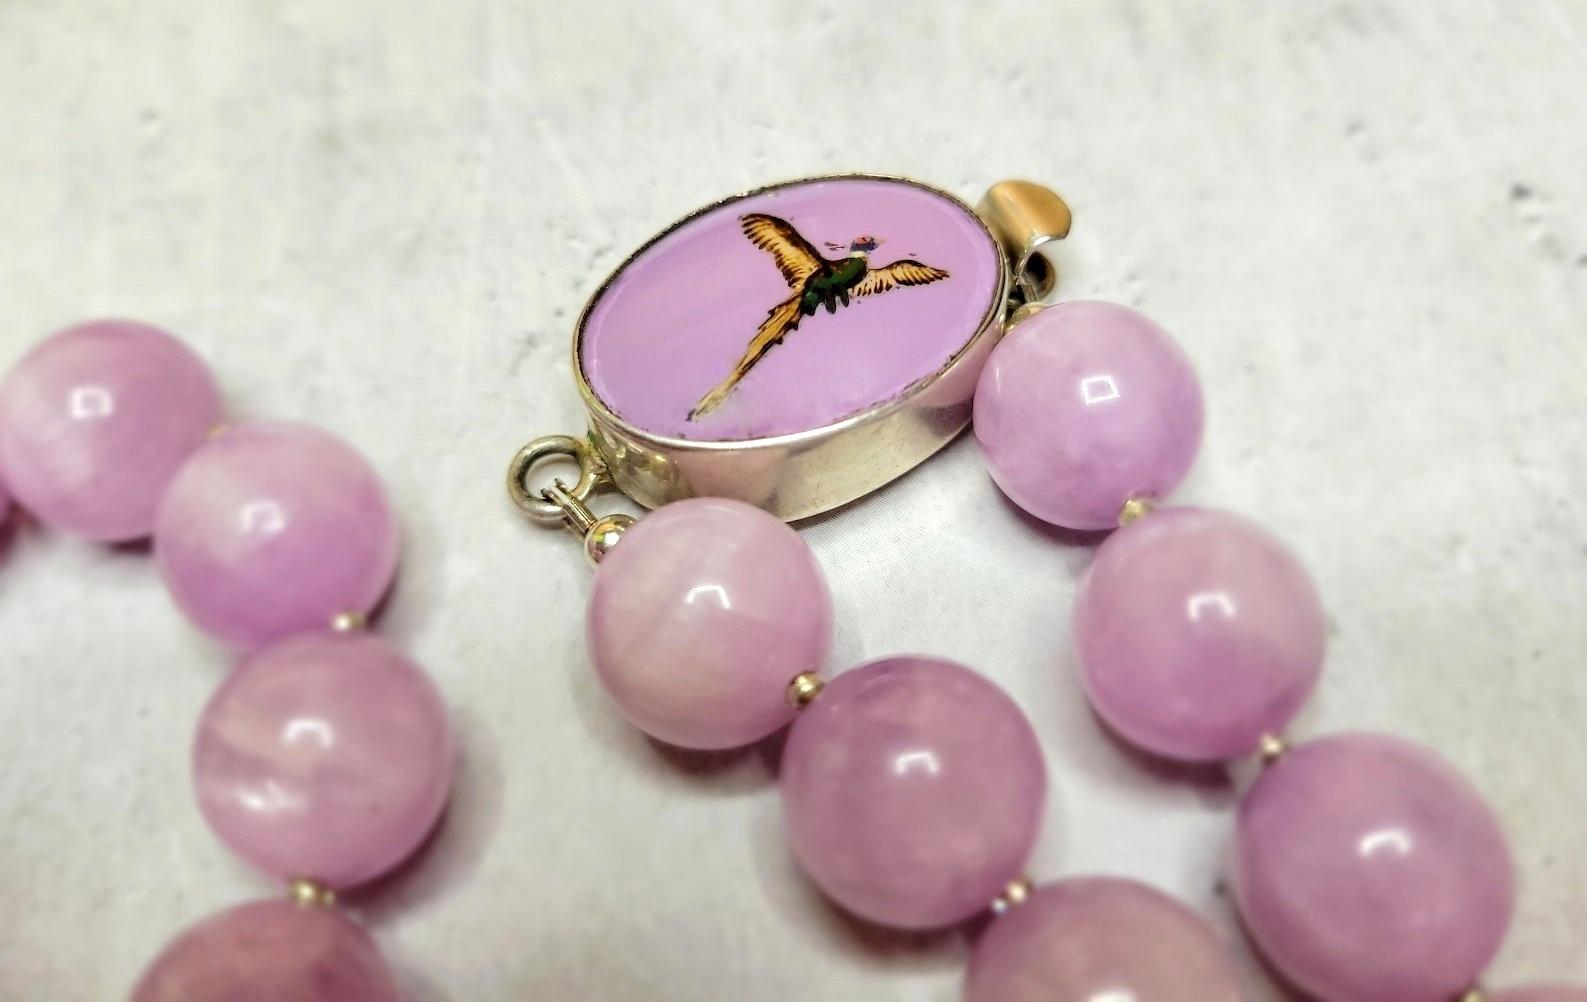 Lavender Kunzite Necklace With Vintage Painted Glass Essex Crystal Clasp For Sale 3